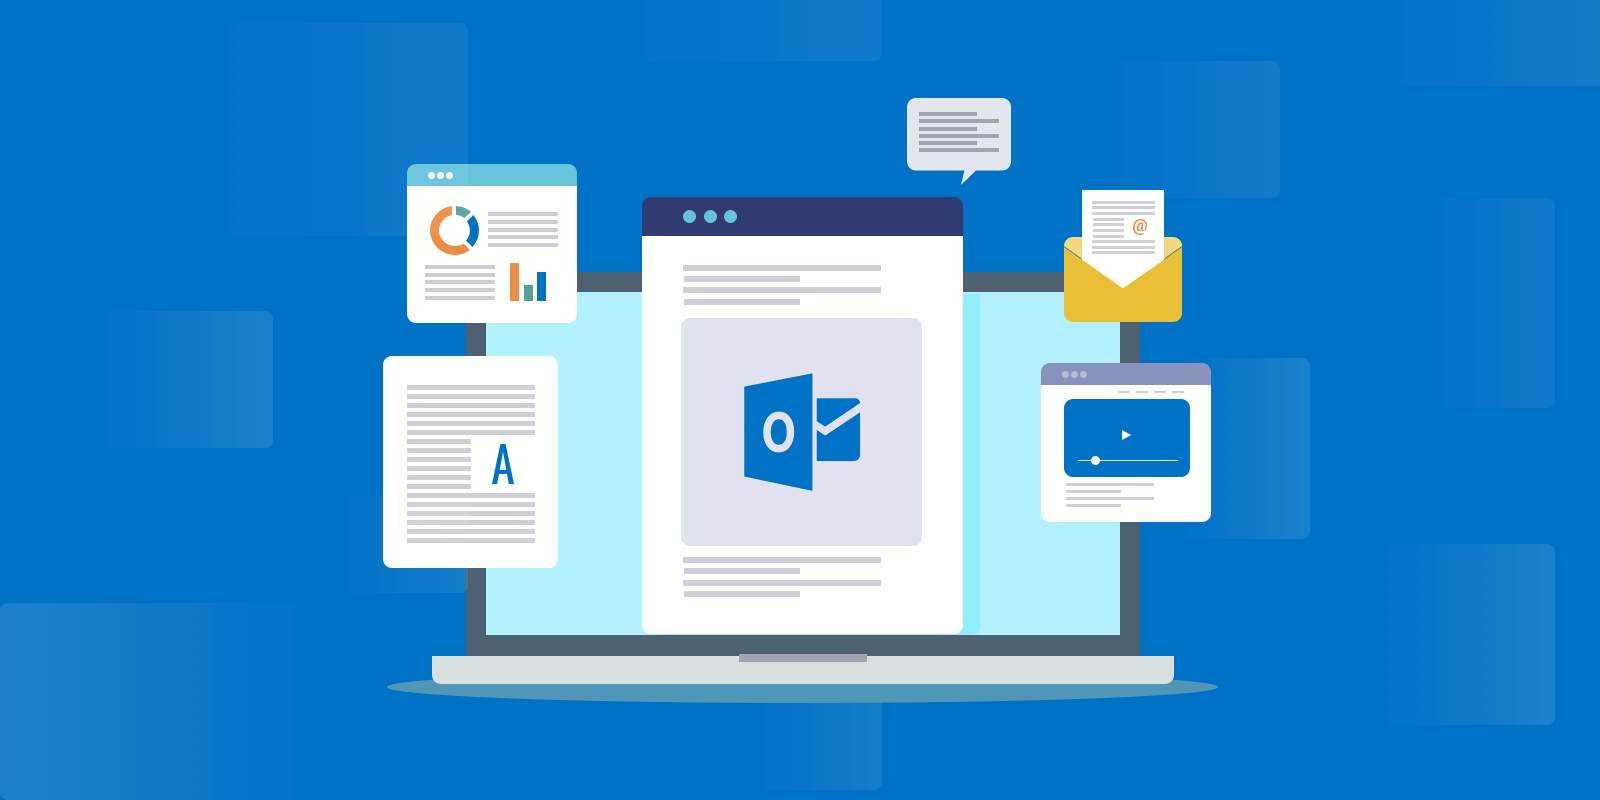 How to use HTML emails in Outlook